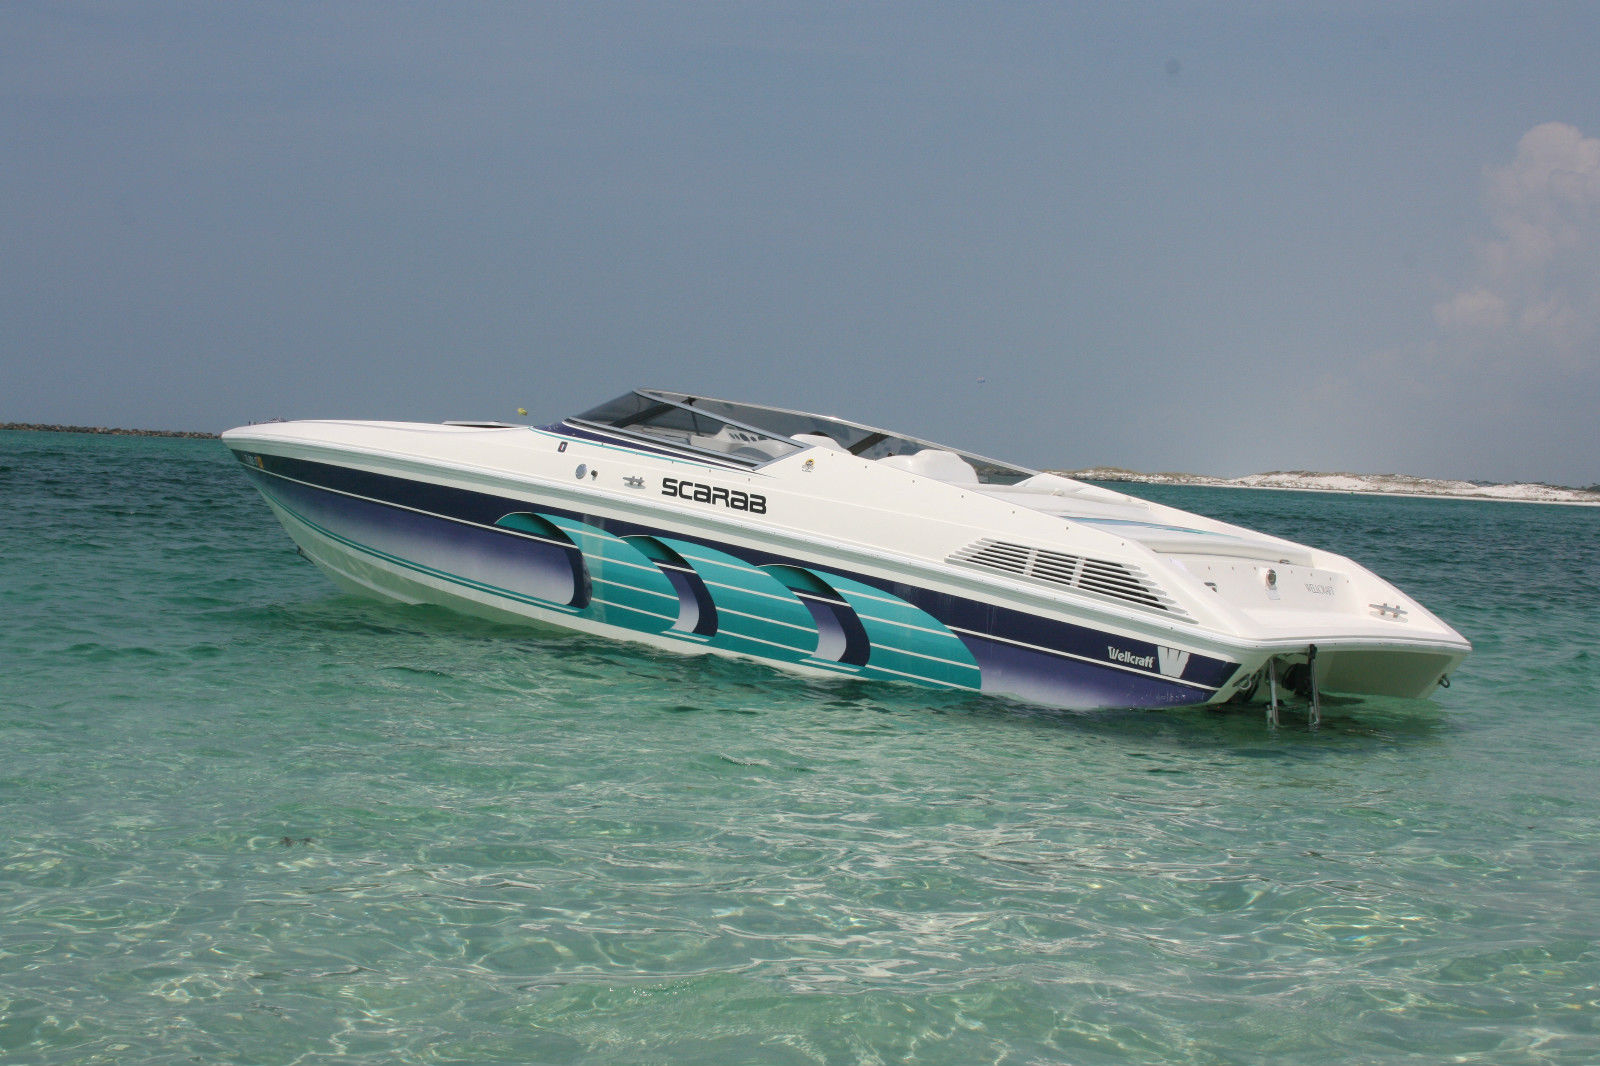 Wellcraft SCARAB 29 1994 for sale for $10,000.